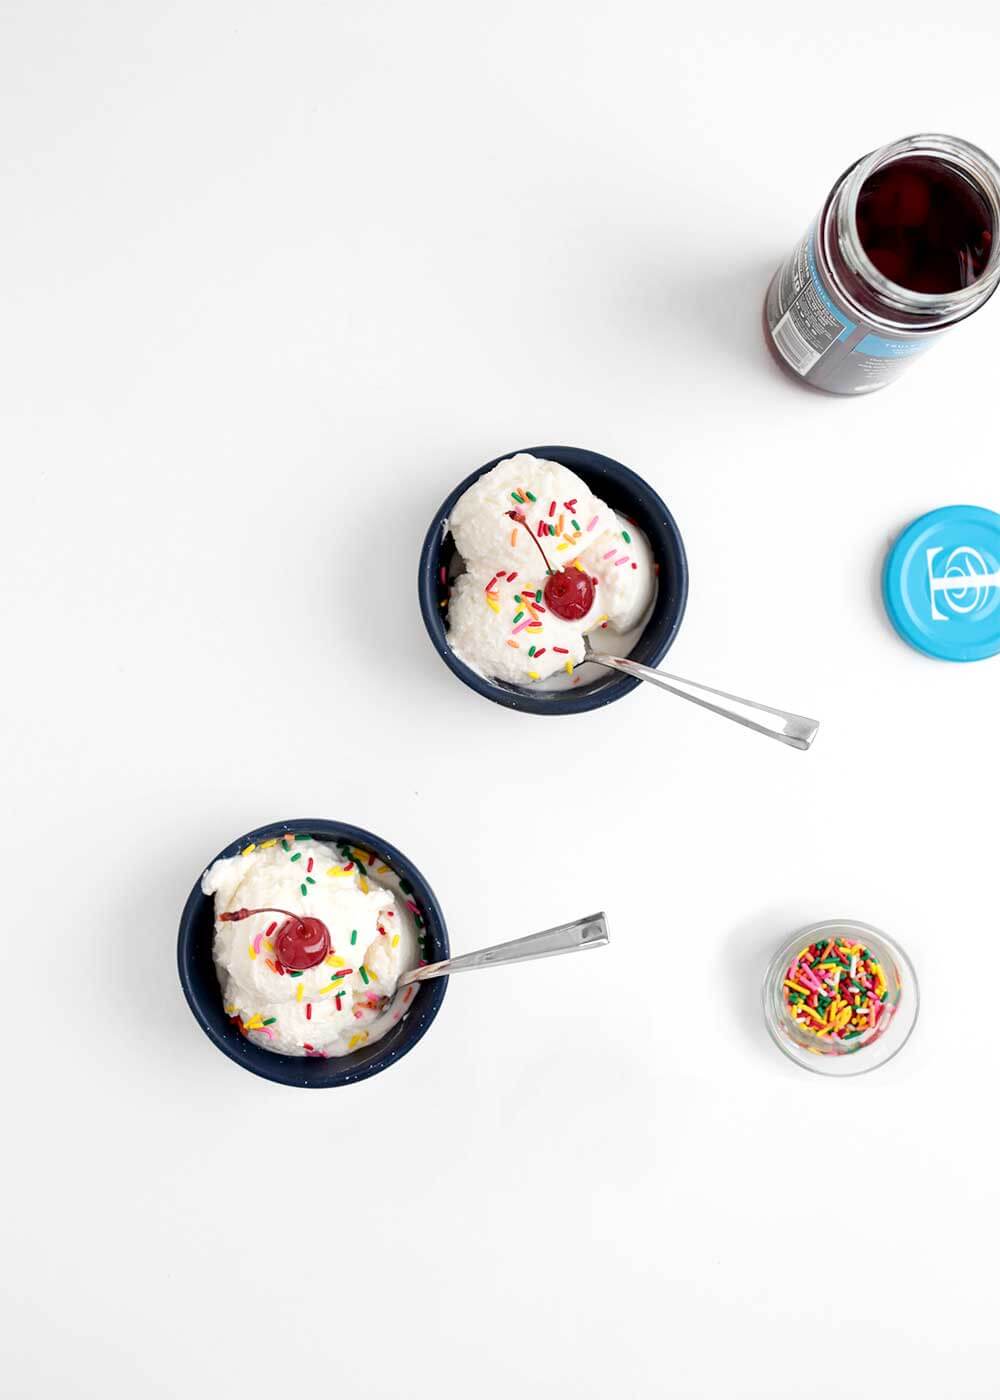 Snow Ice Cream recipe with sprinkles from The Faux Martha